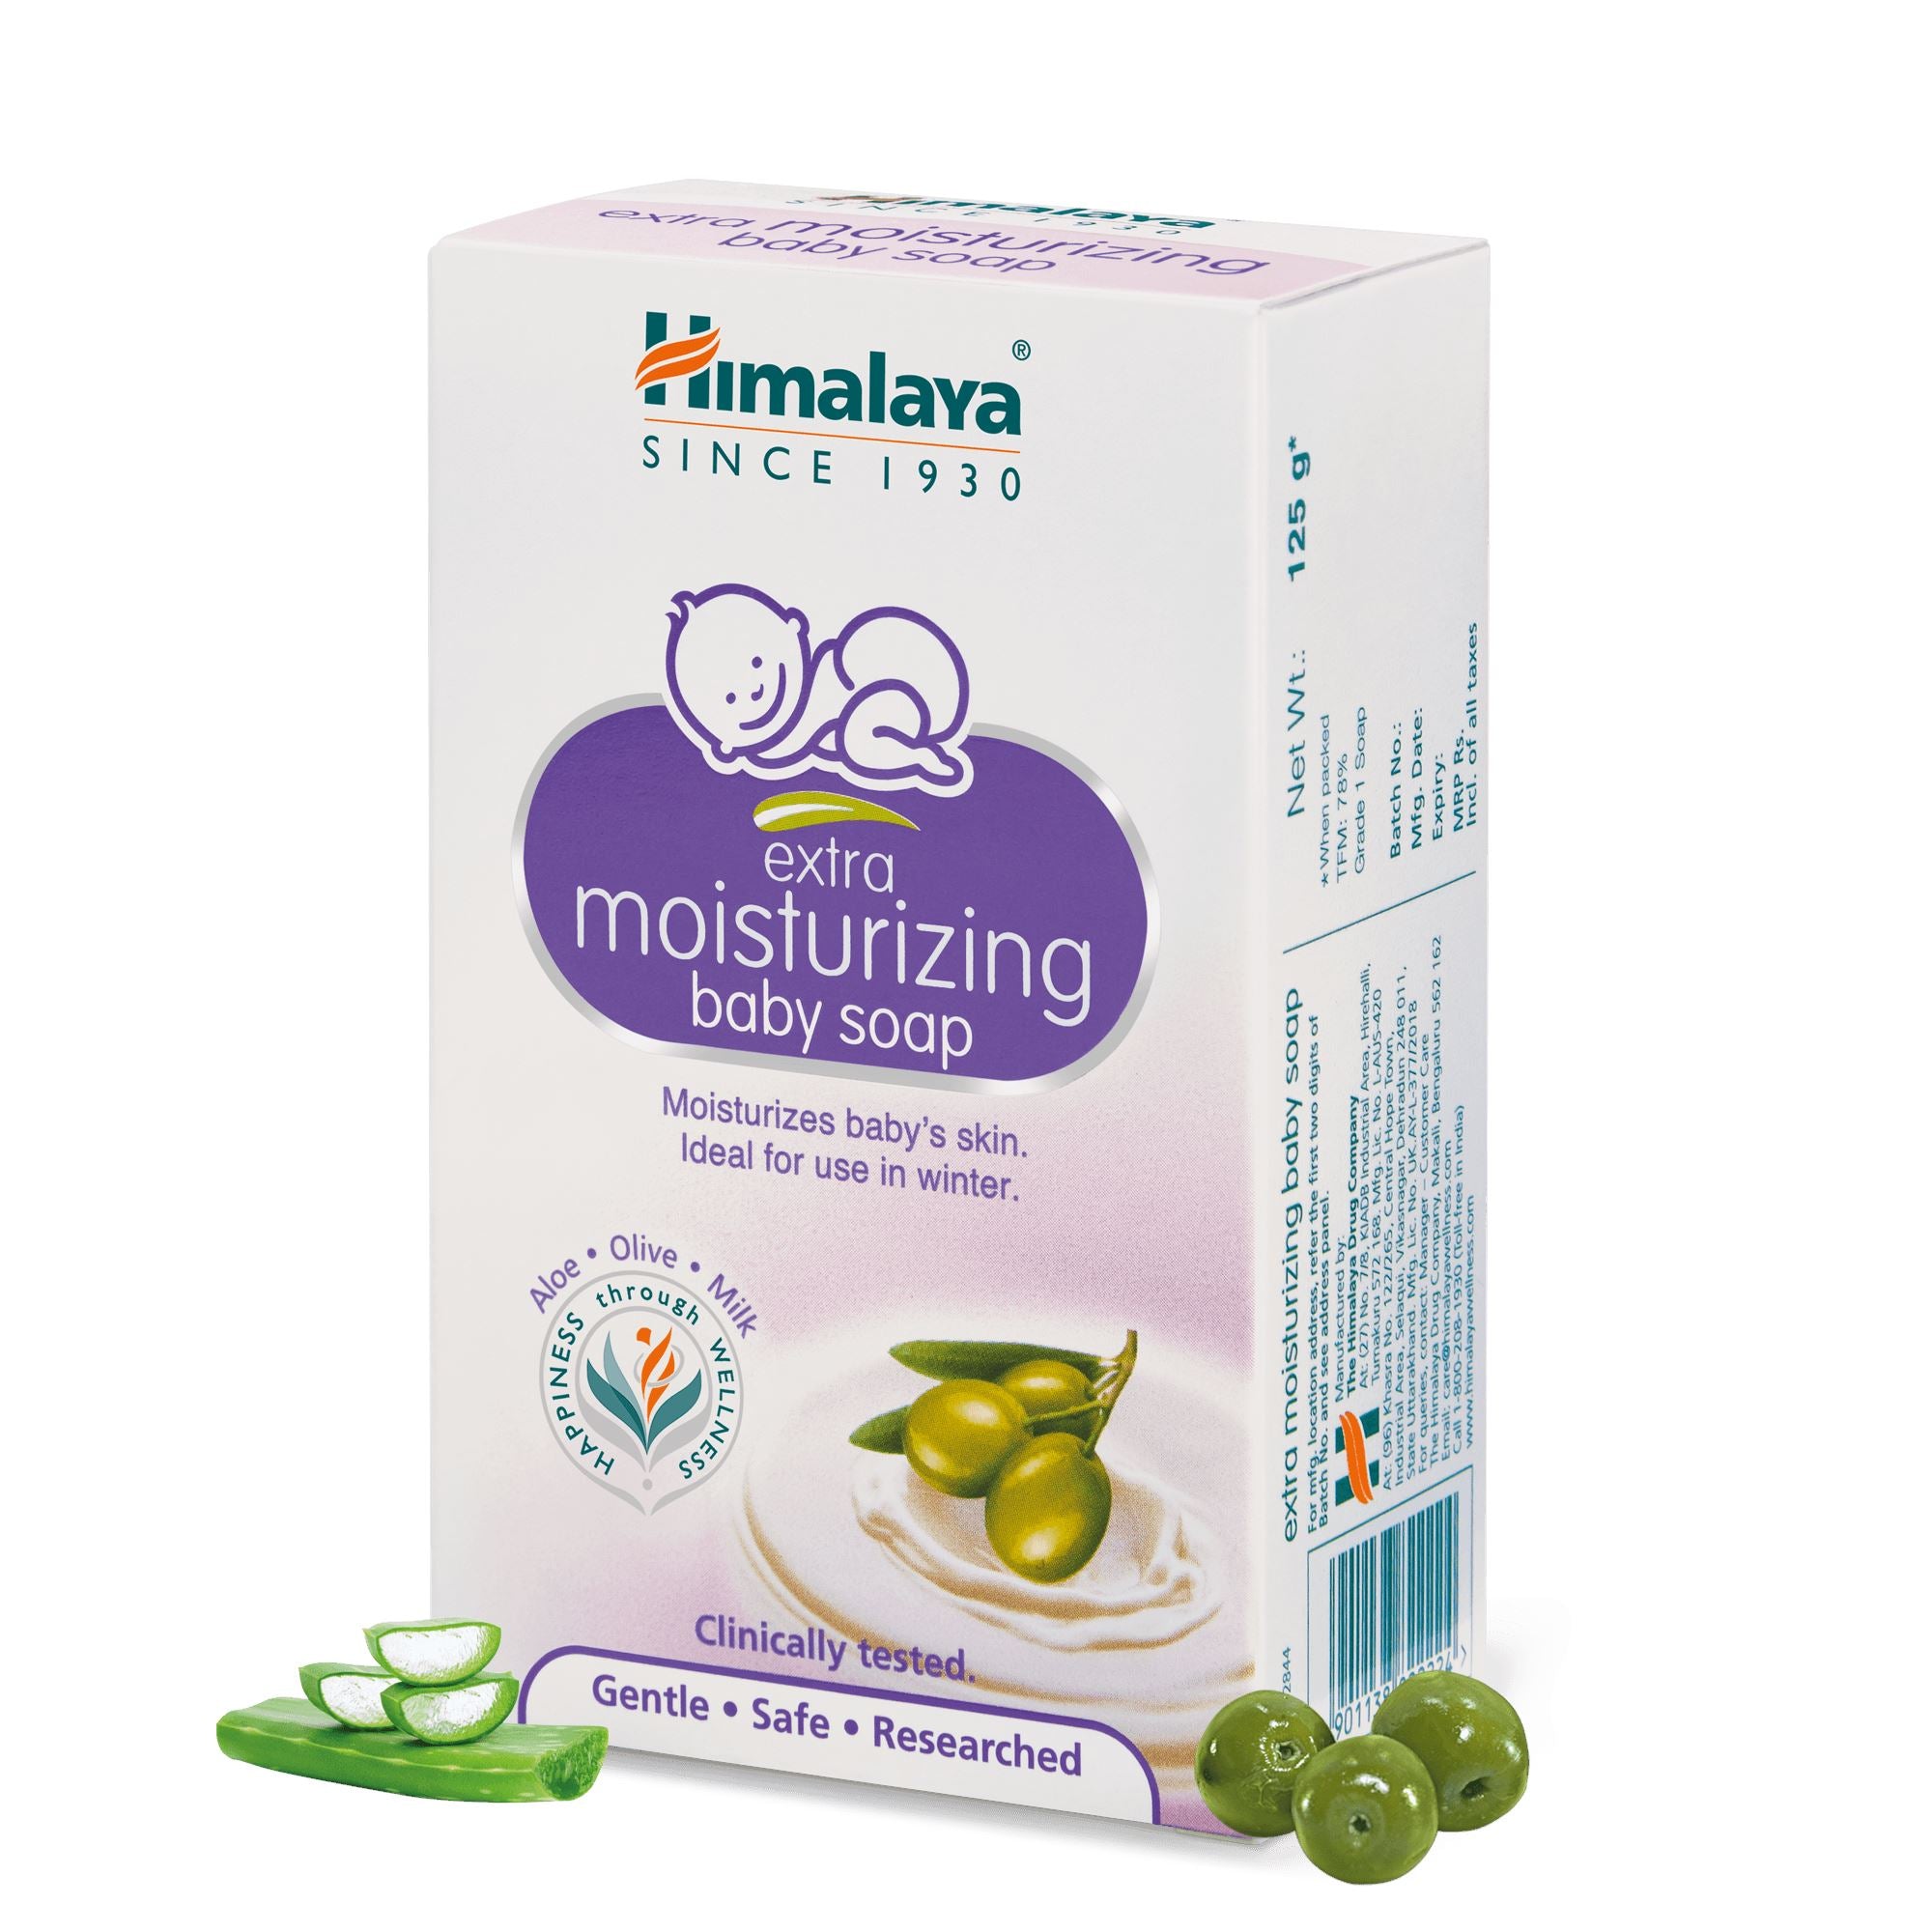 Himalaya extra moisturizing baby soap 125g- Gently cleanses without causing post-bath dryness